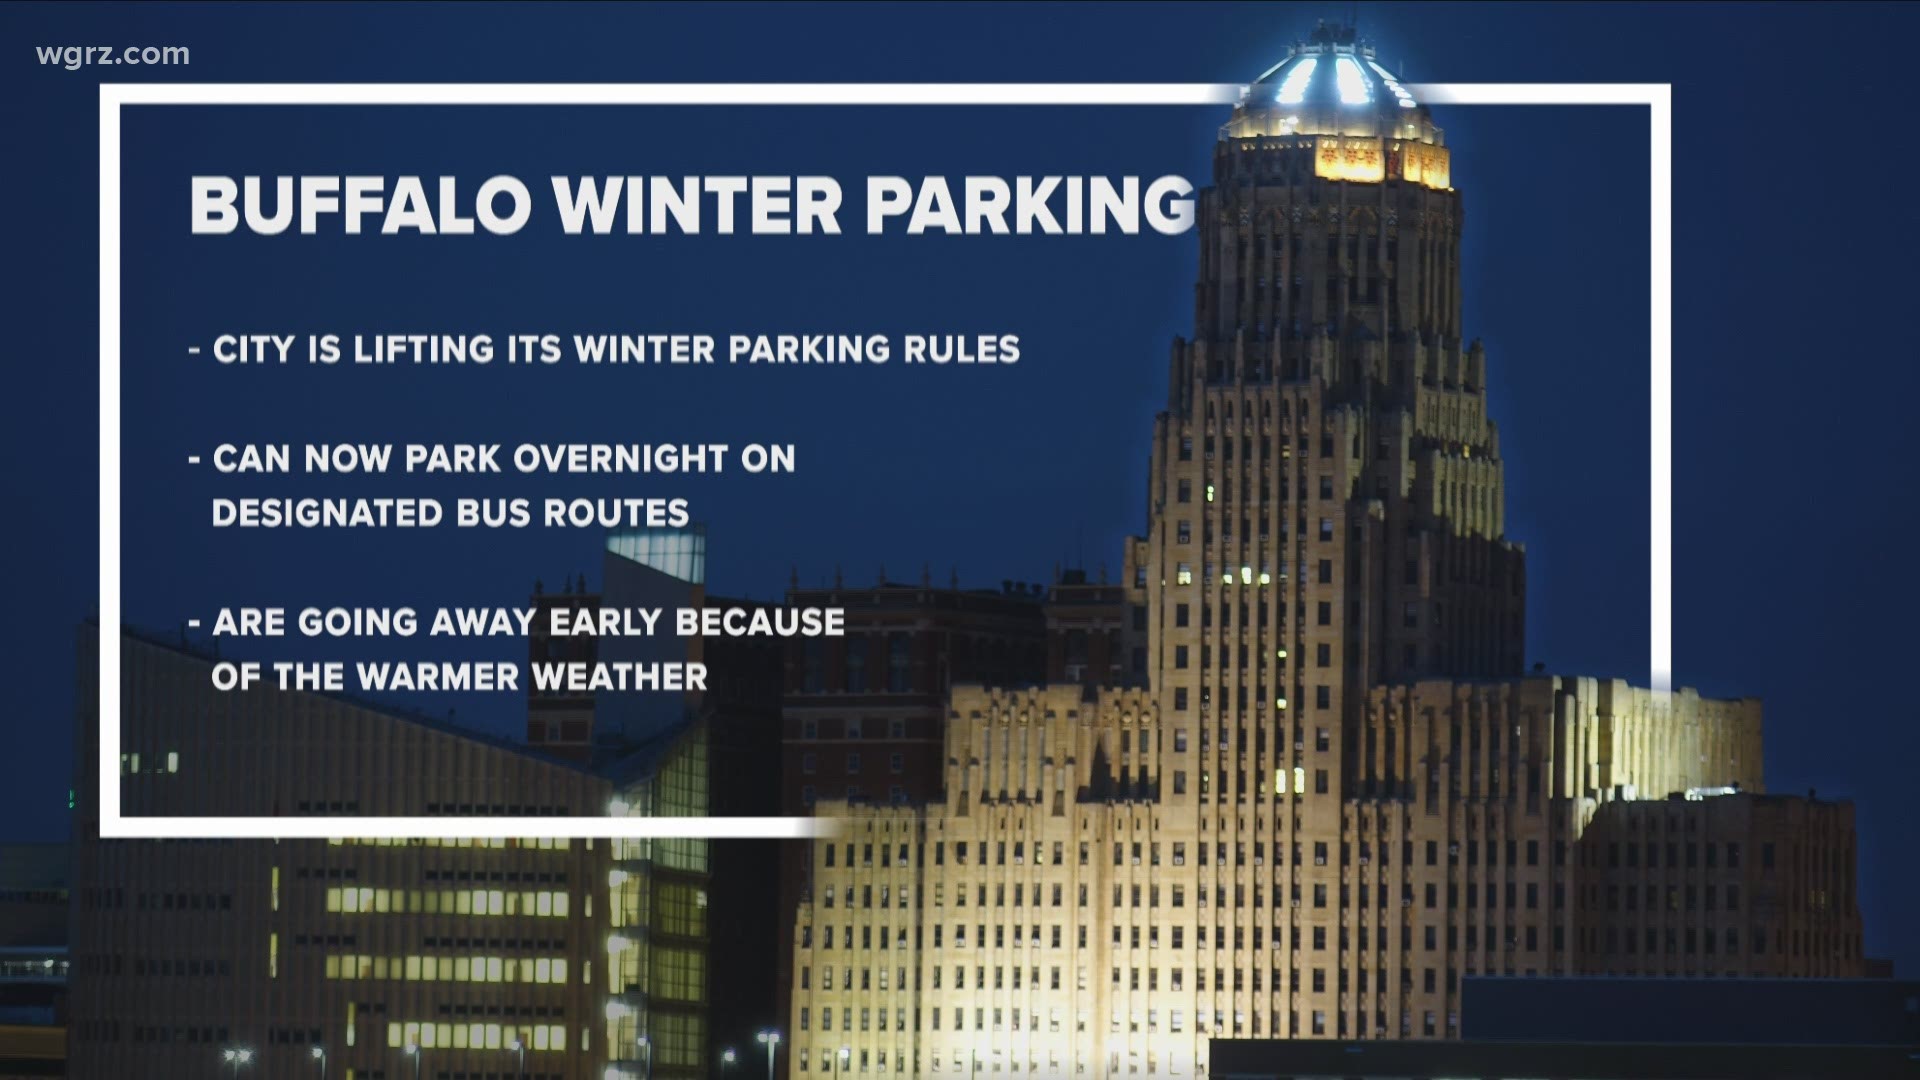 The city says the rules are going away early due to the warmer weather.